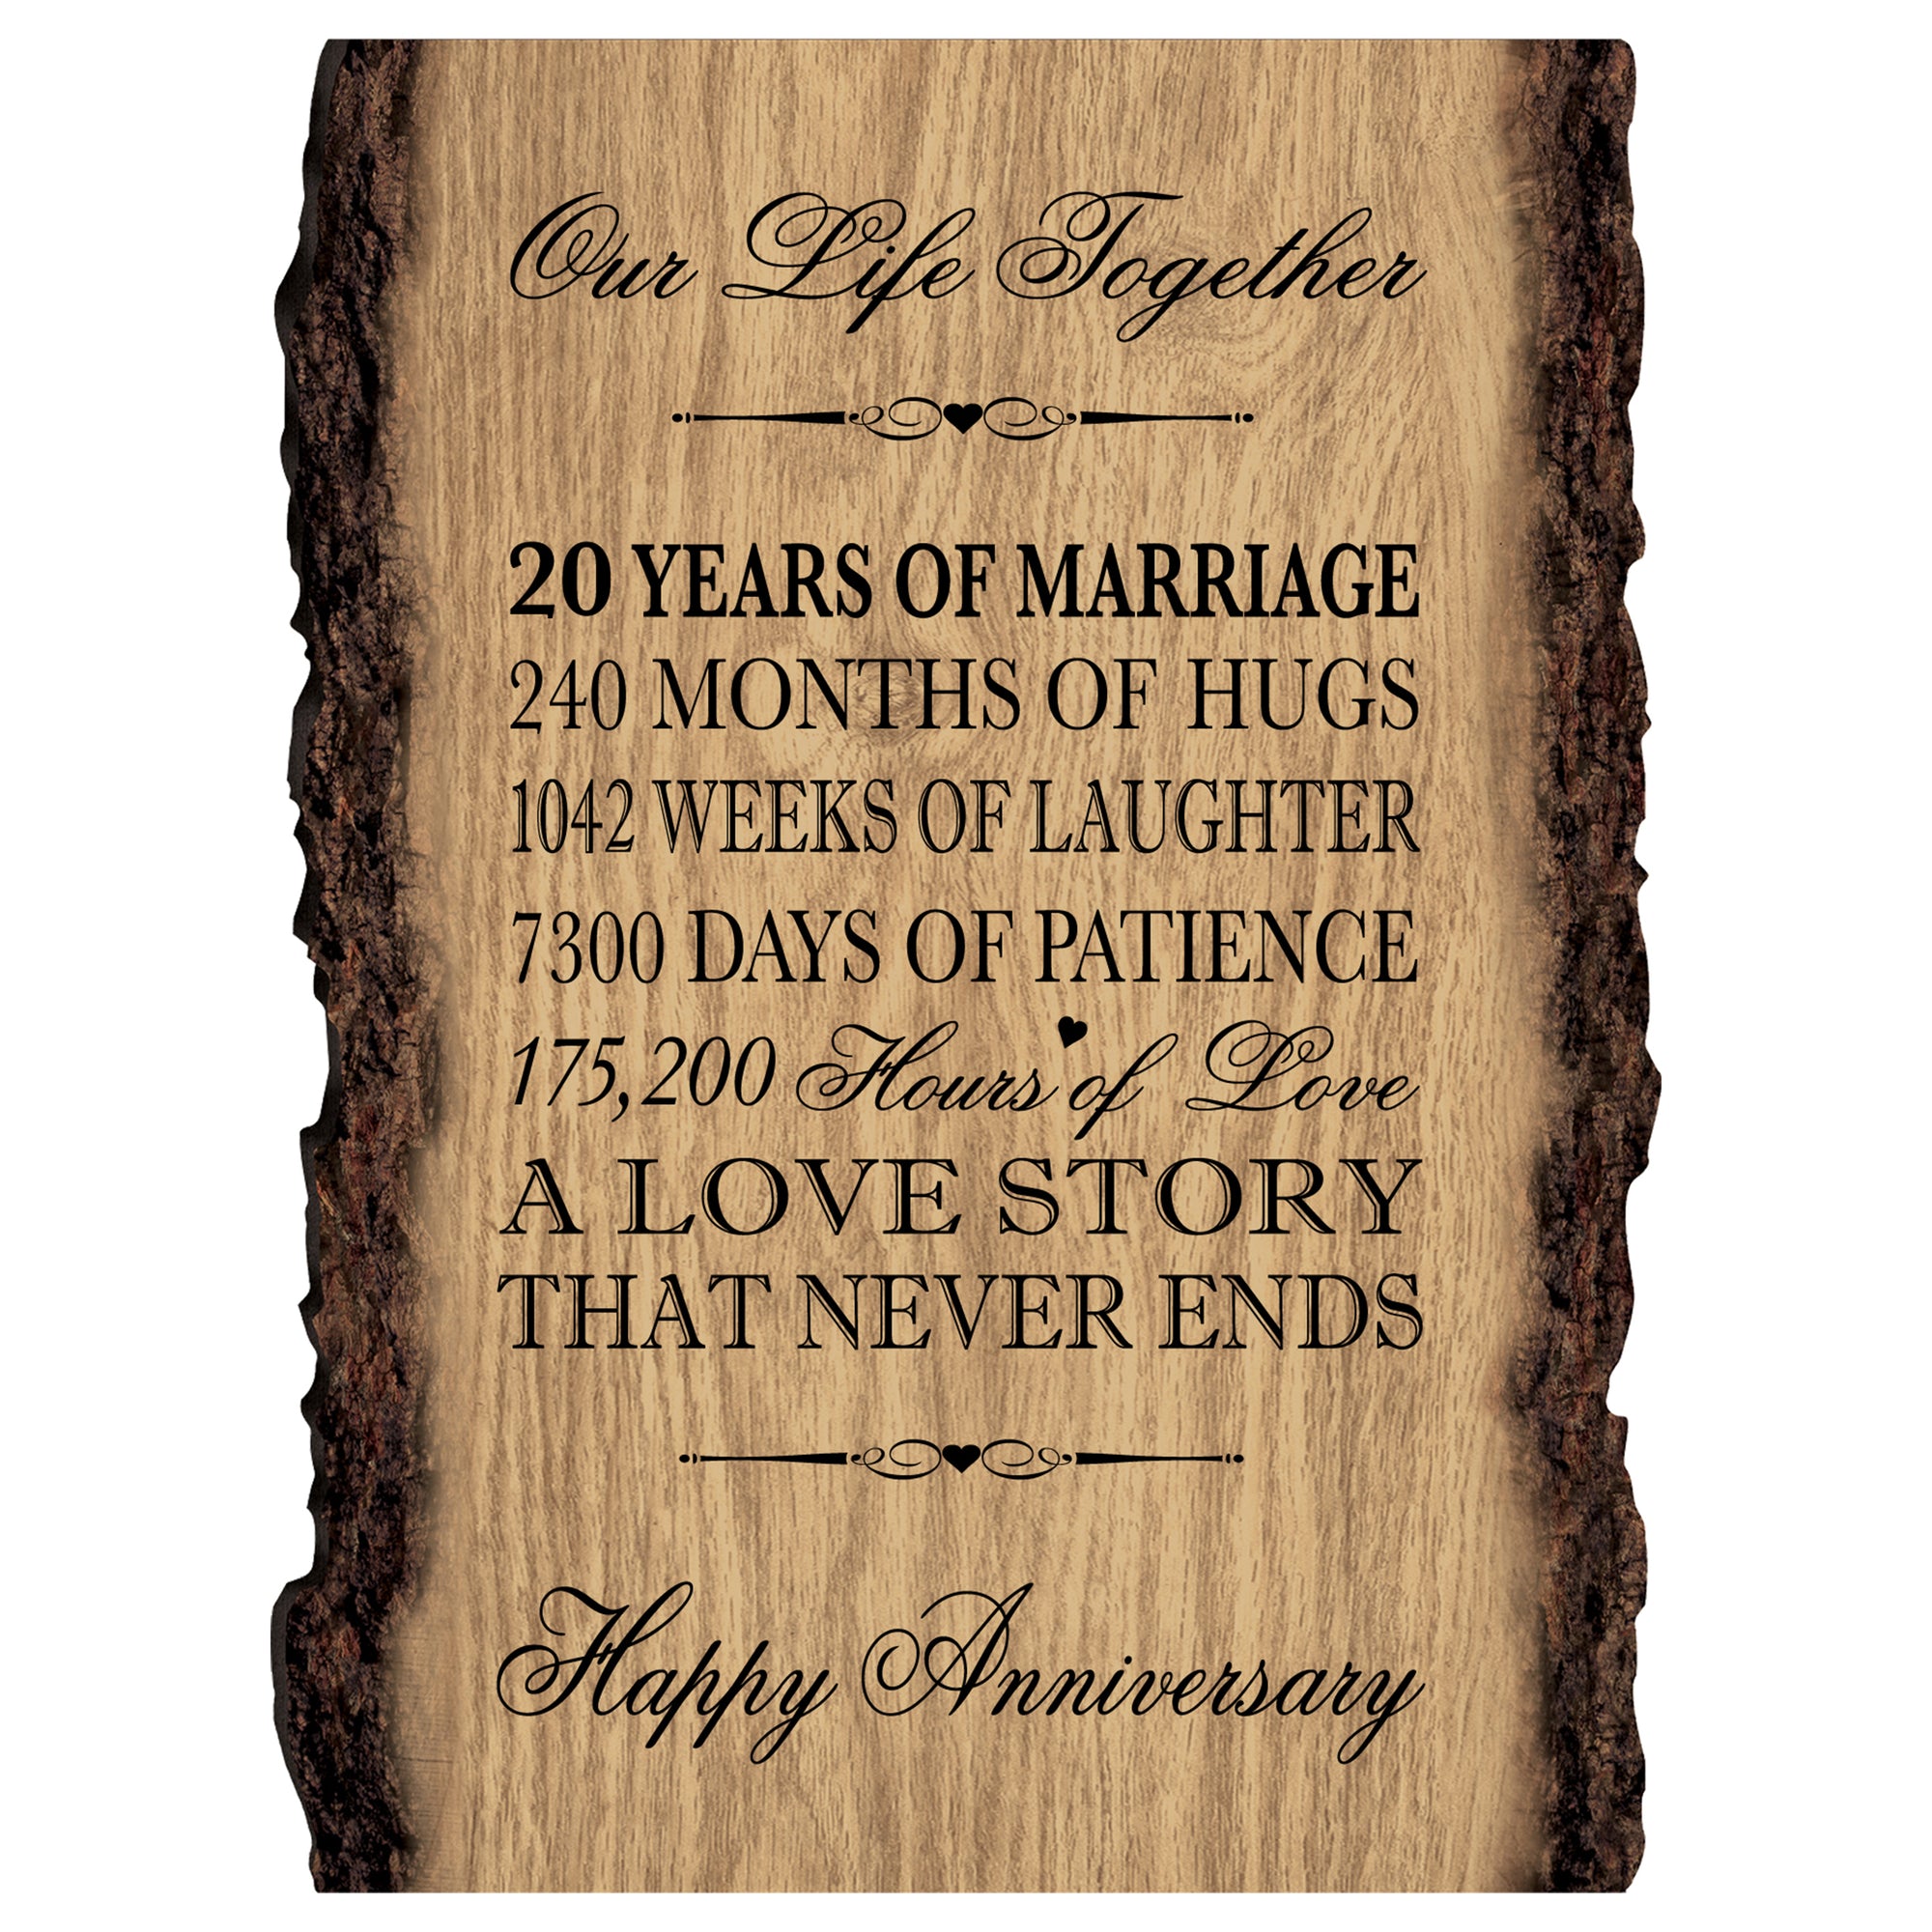 Rustic Wedding Anniversary 9x12 Barky Wall Plaque Gift For Parents, Grandparents New Couple - 20 Years Of Marriage